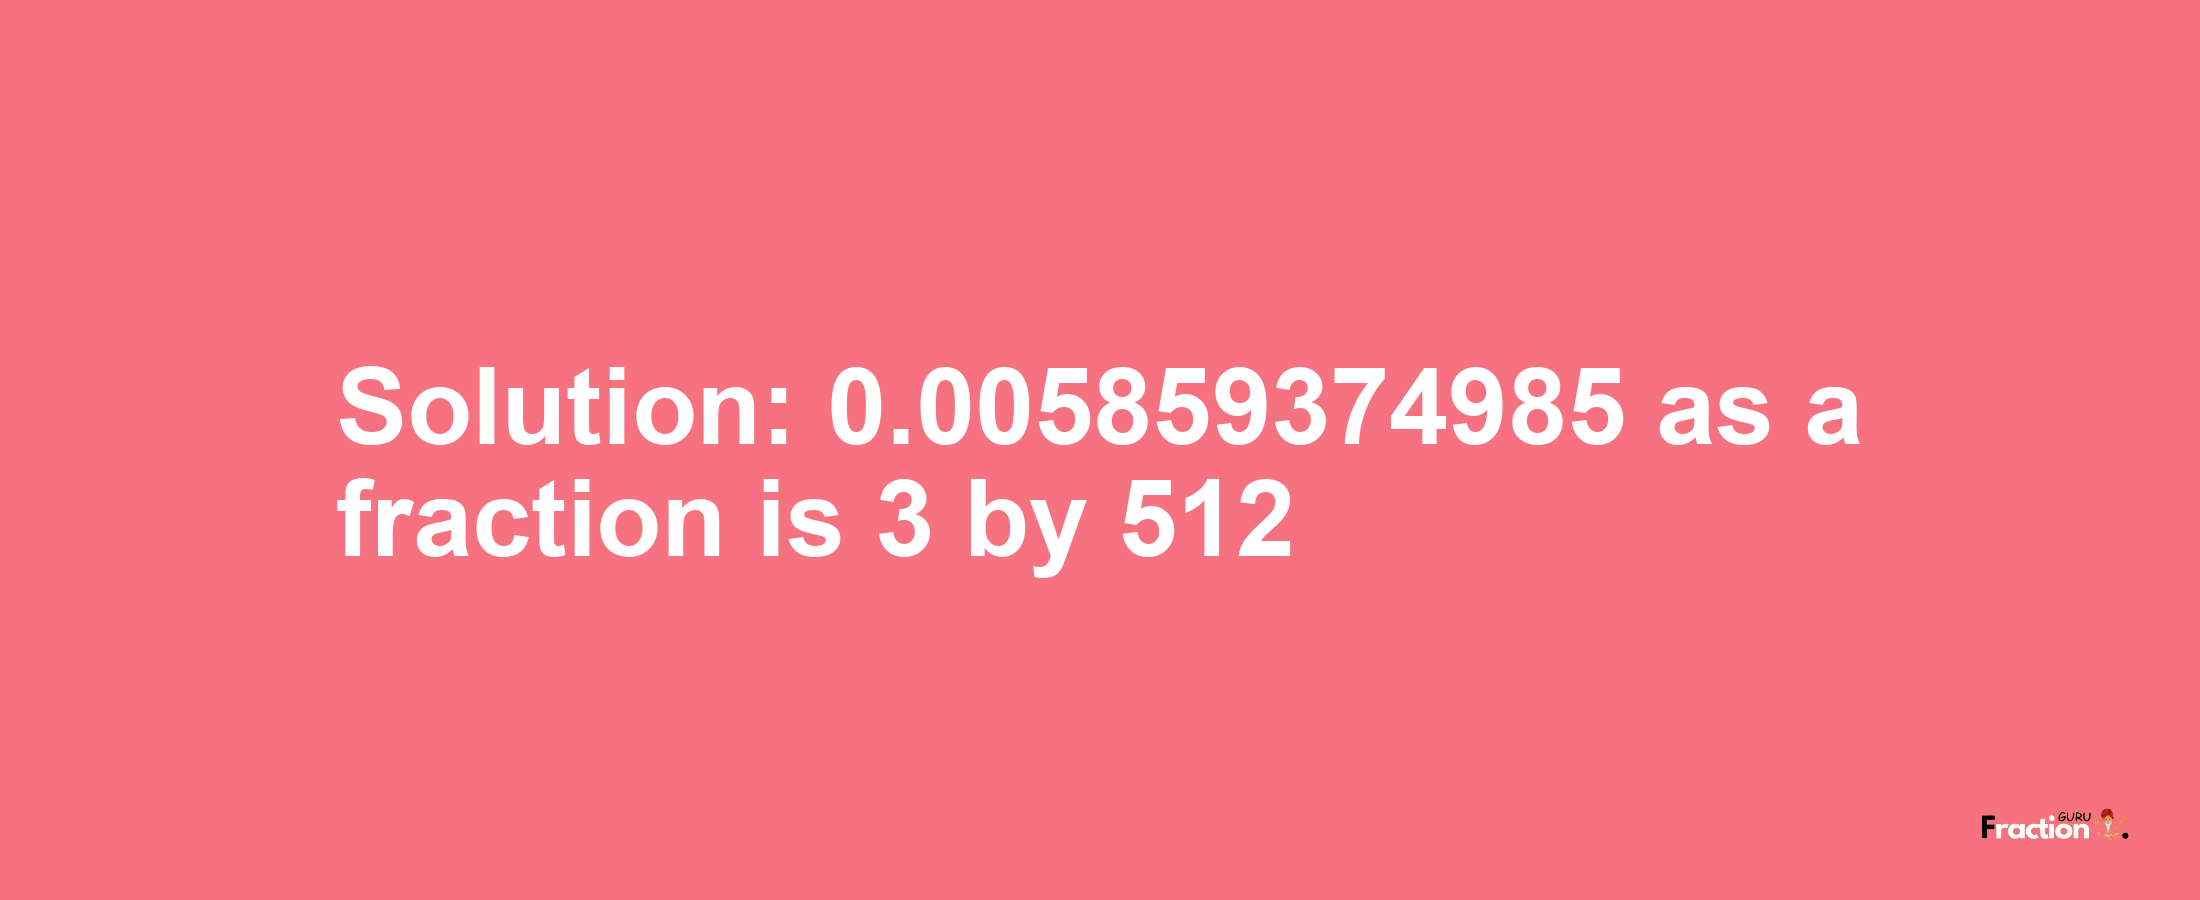 Solution:0.005859374985 as a fraction is 3/512